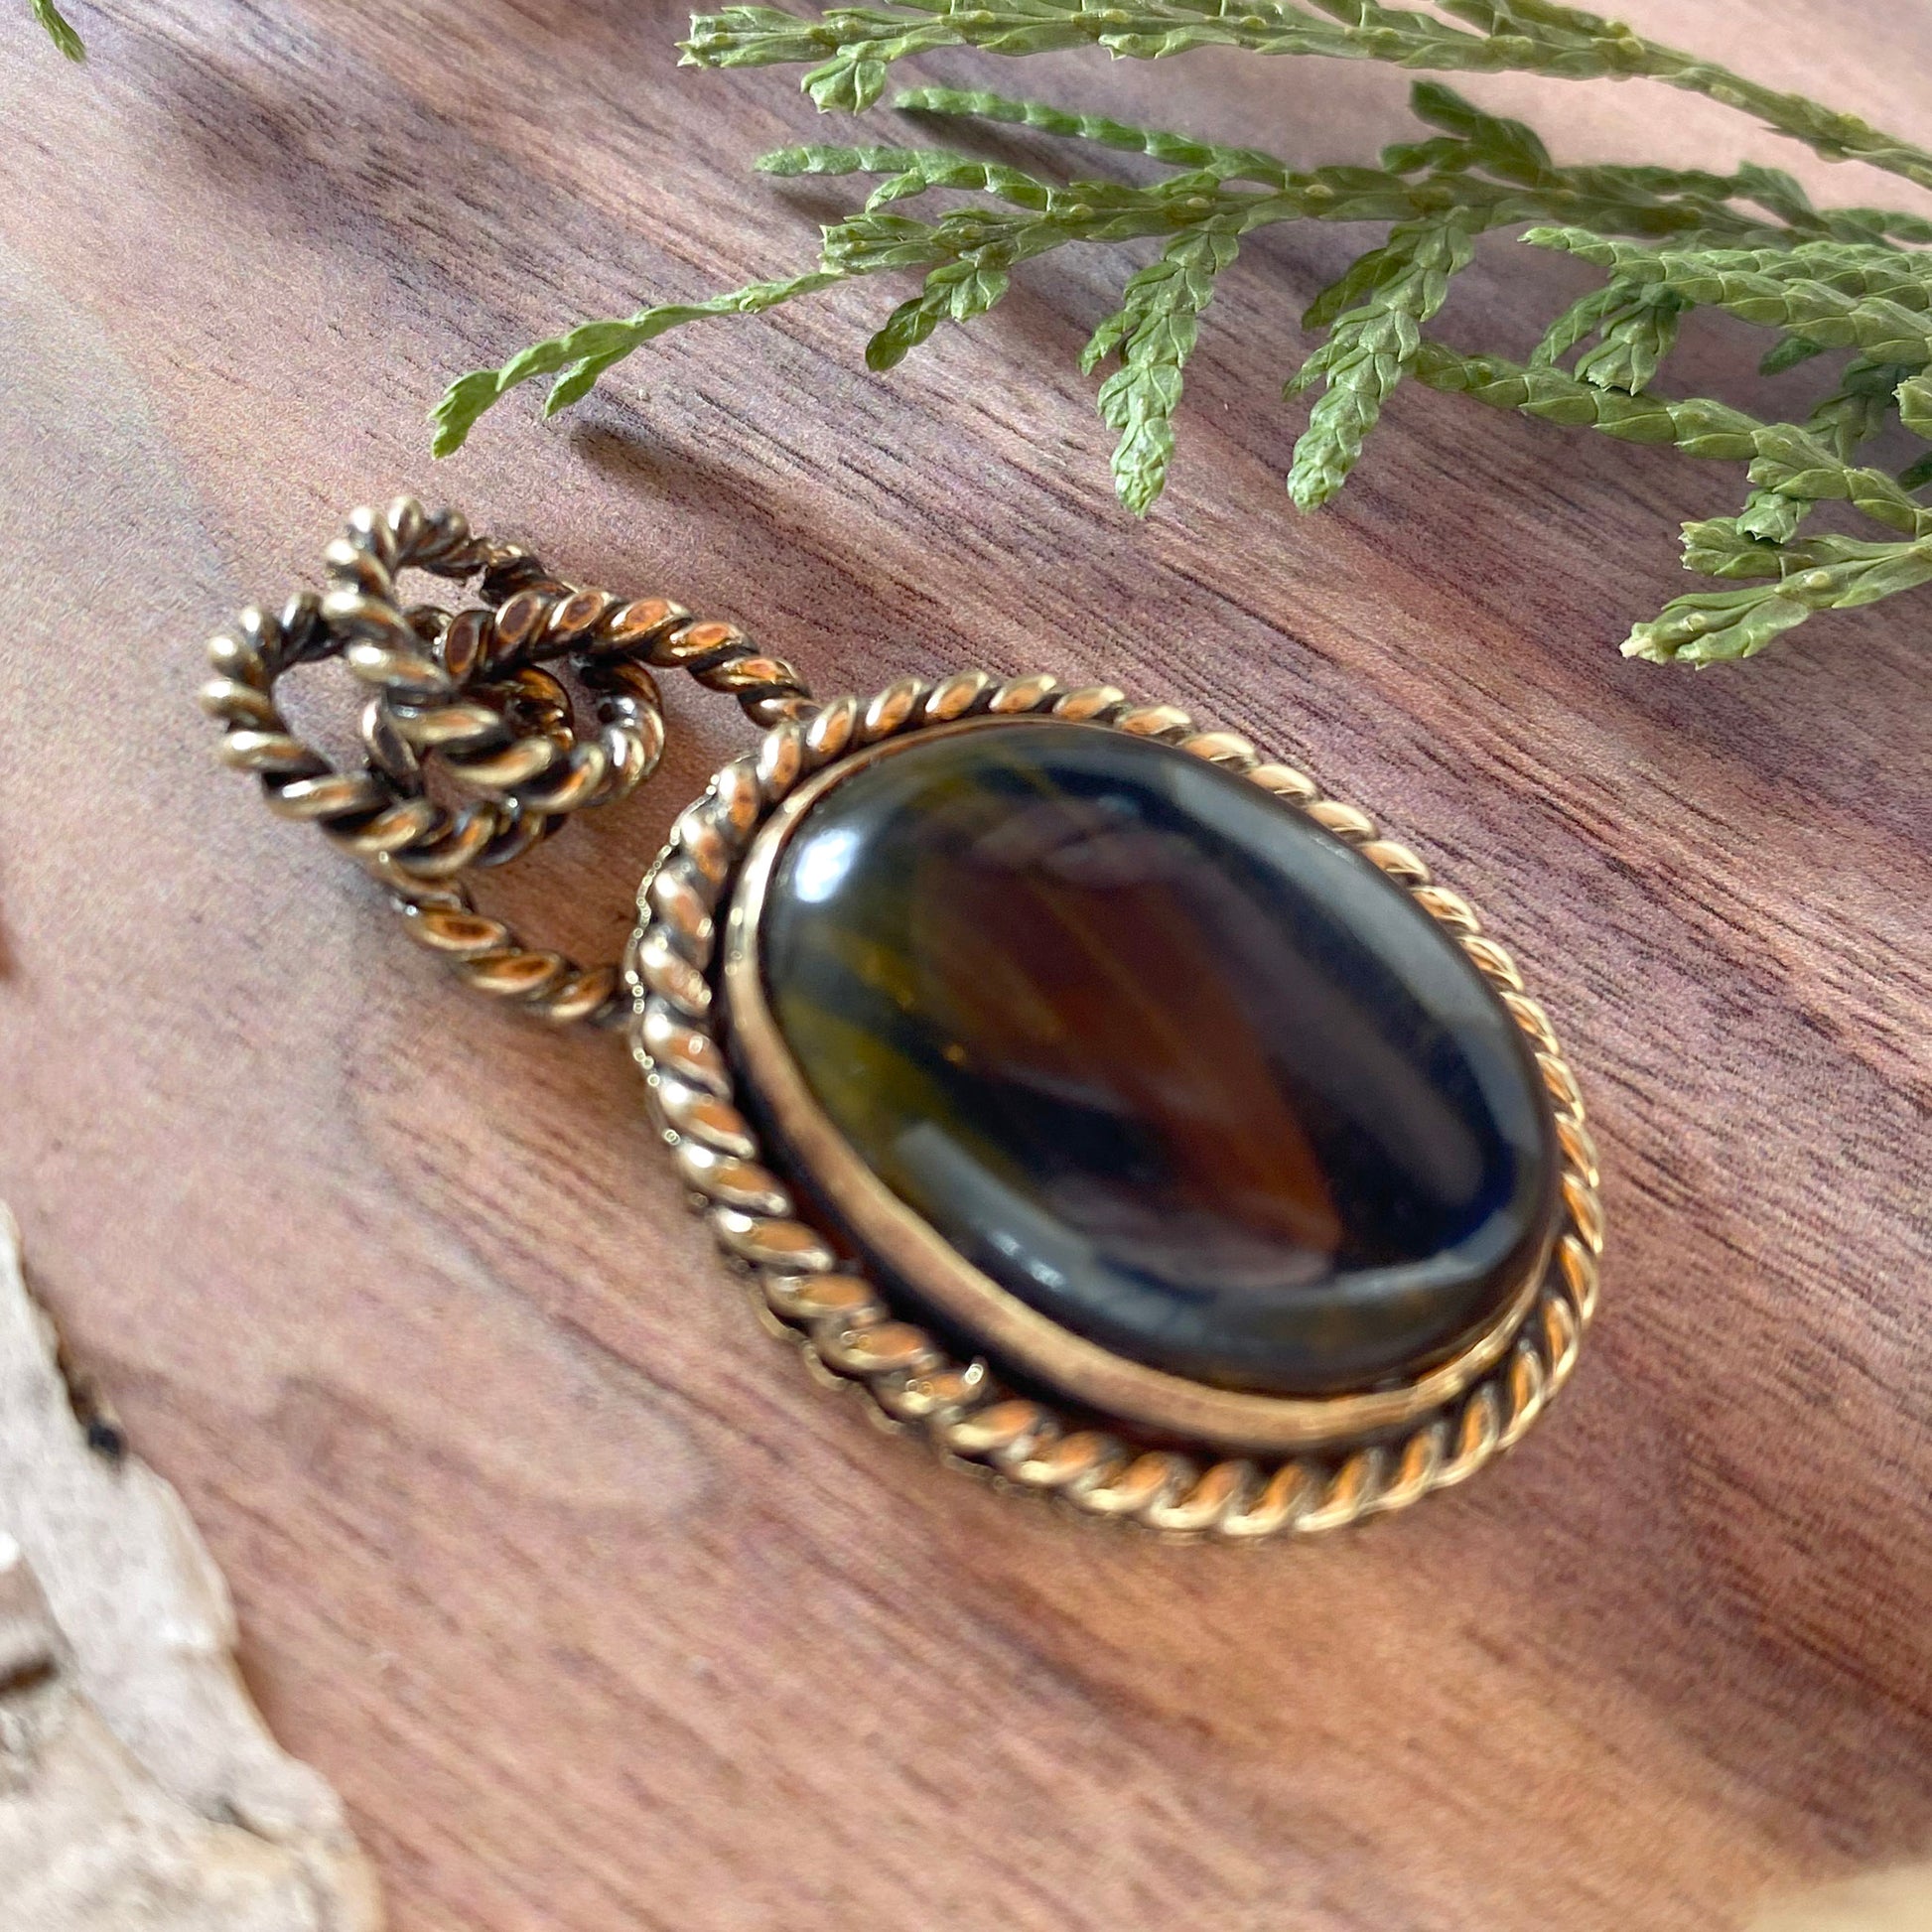 Variegated Blue Tiger Eye Pendant Front View II - Stone Treasures by the Lake